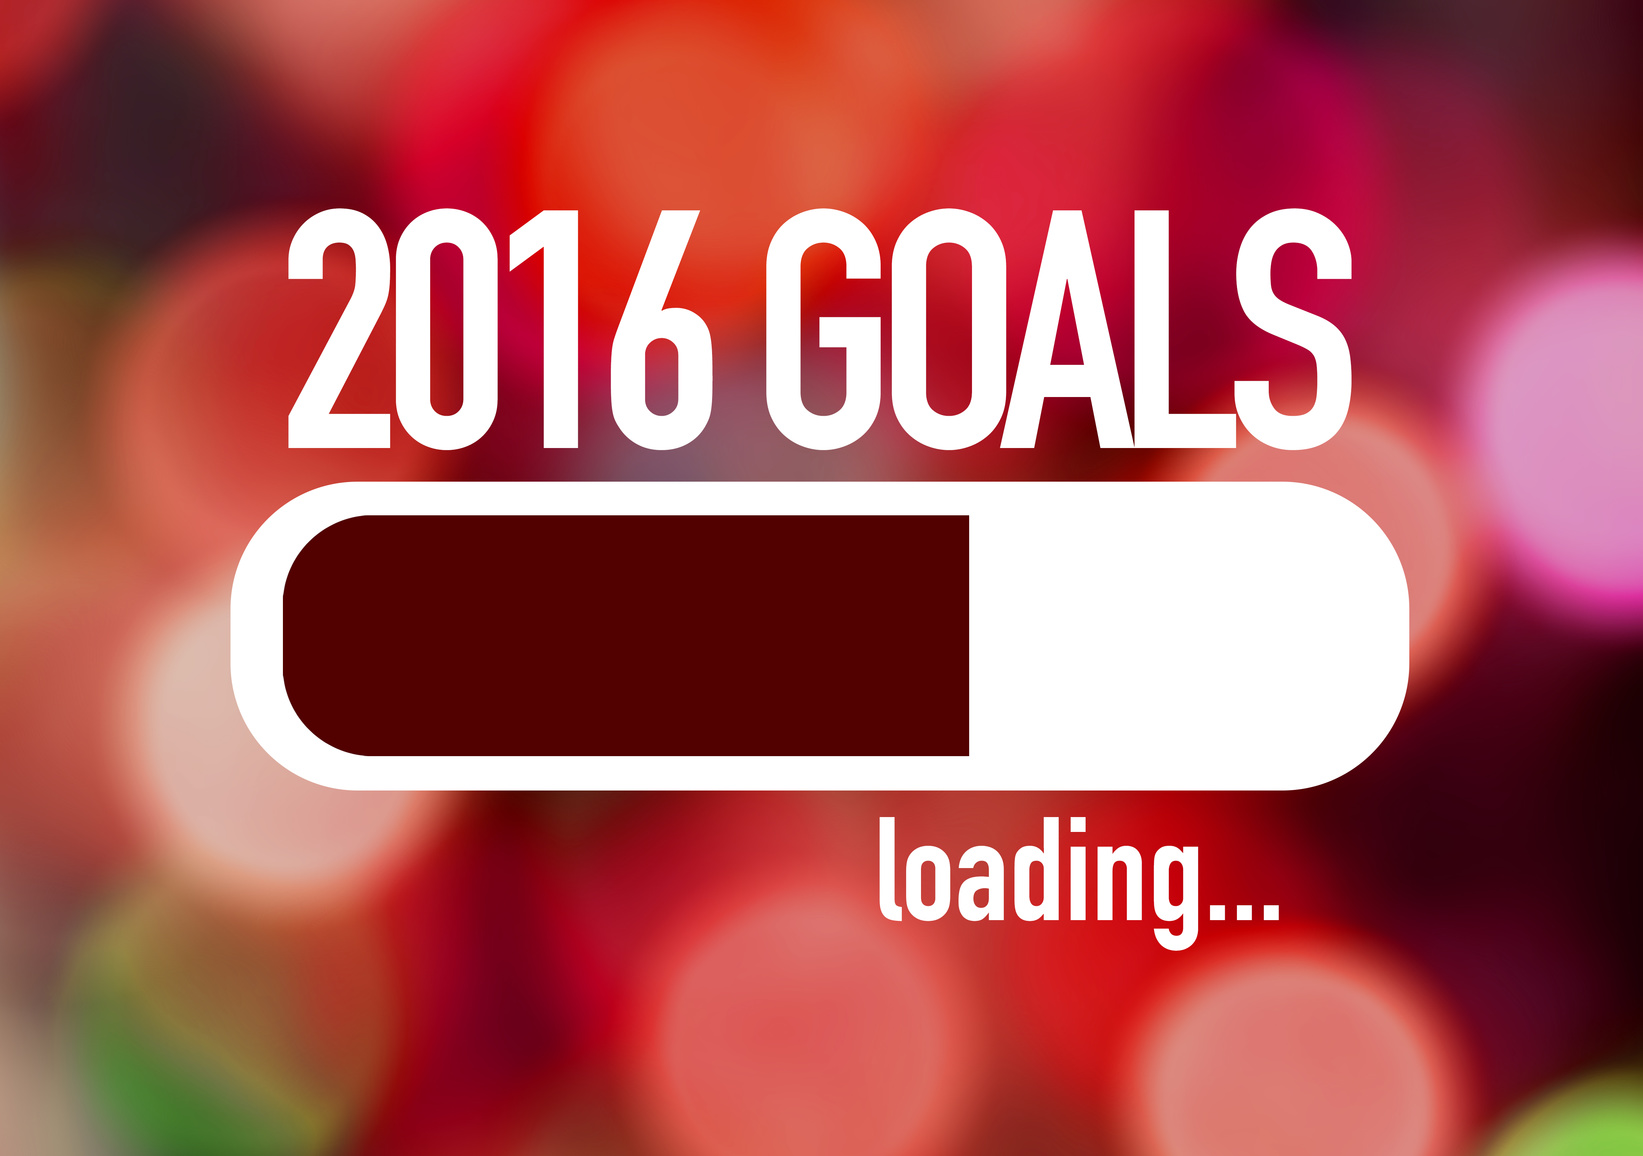 Progress Bar Loading with the text: 2016 Goals